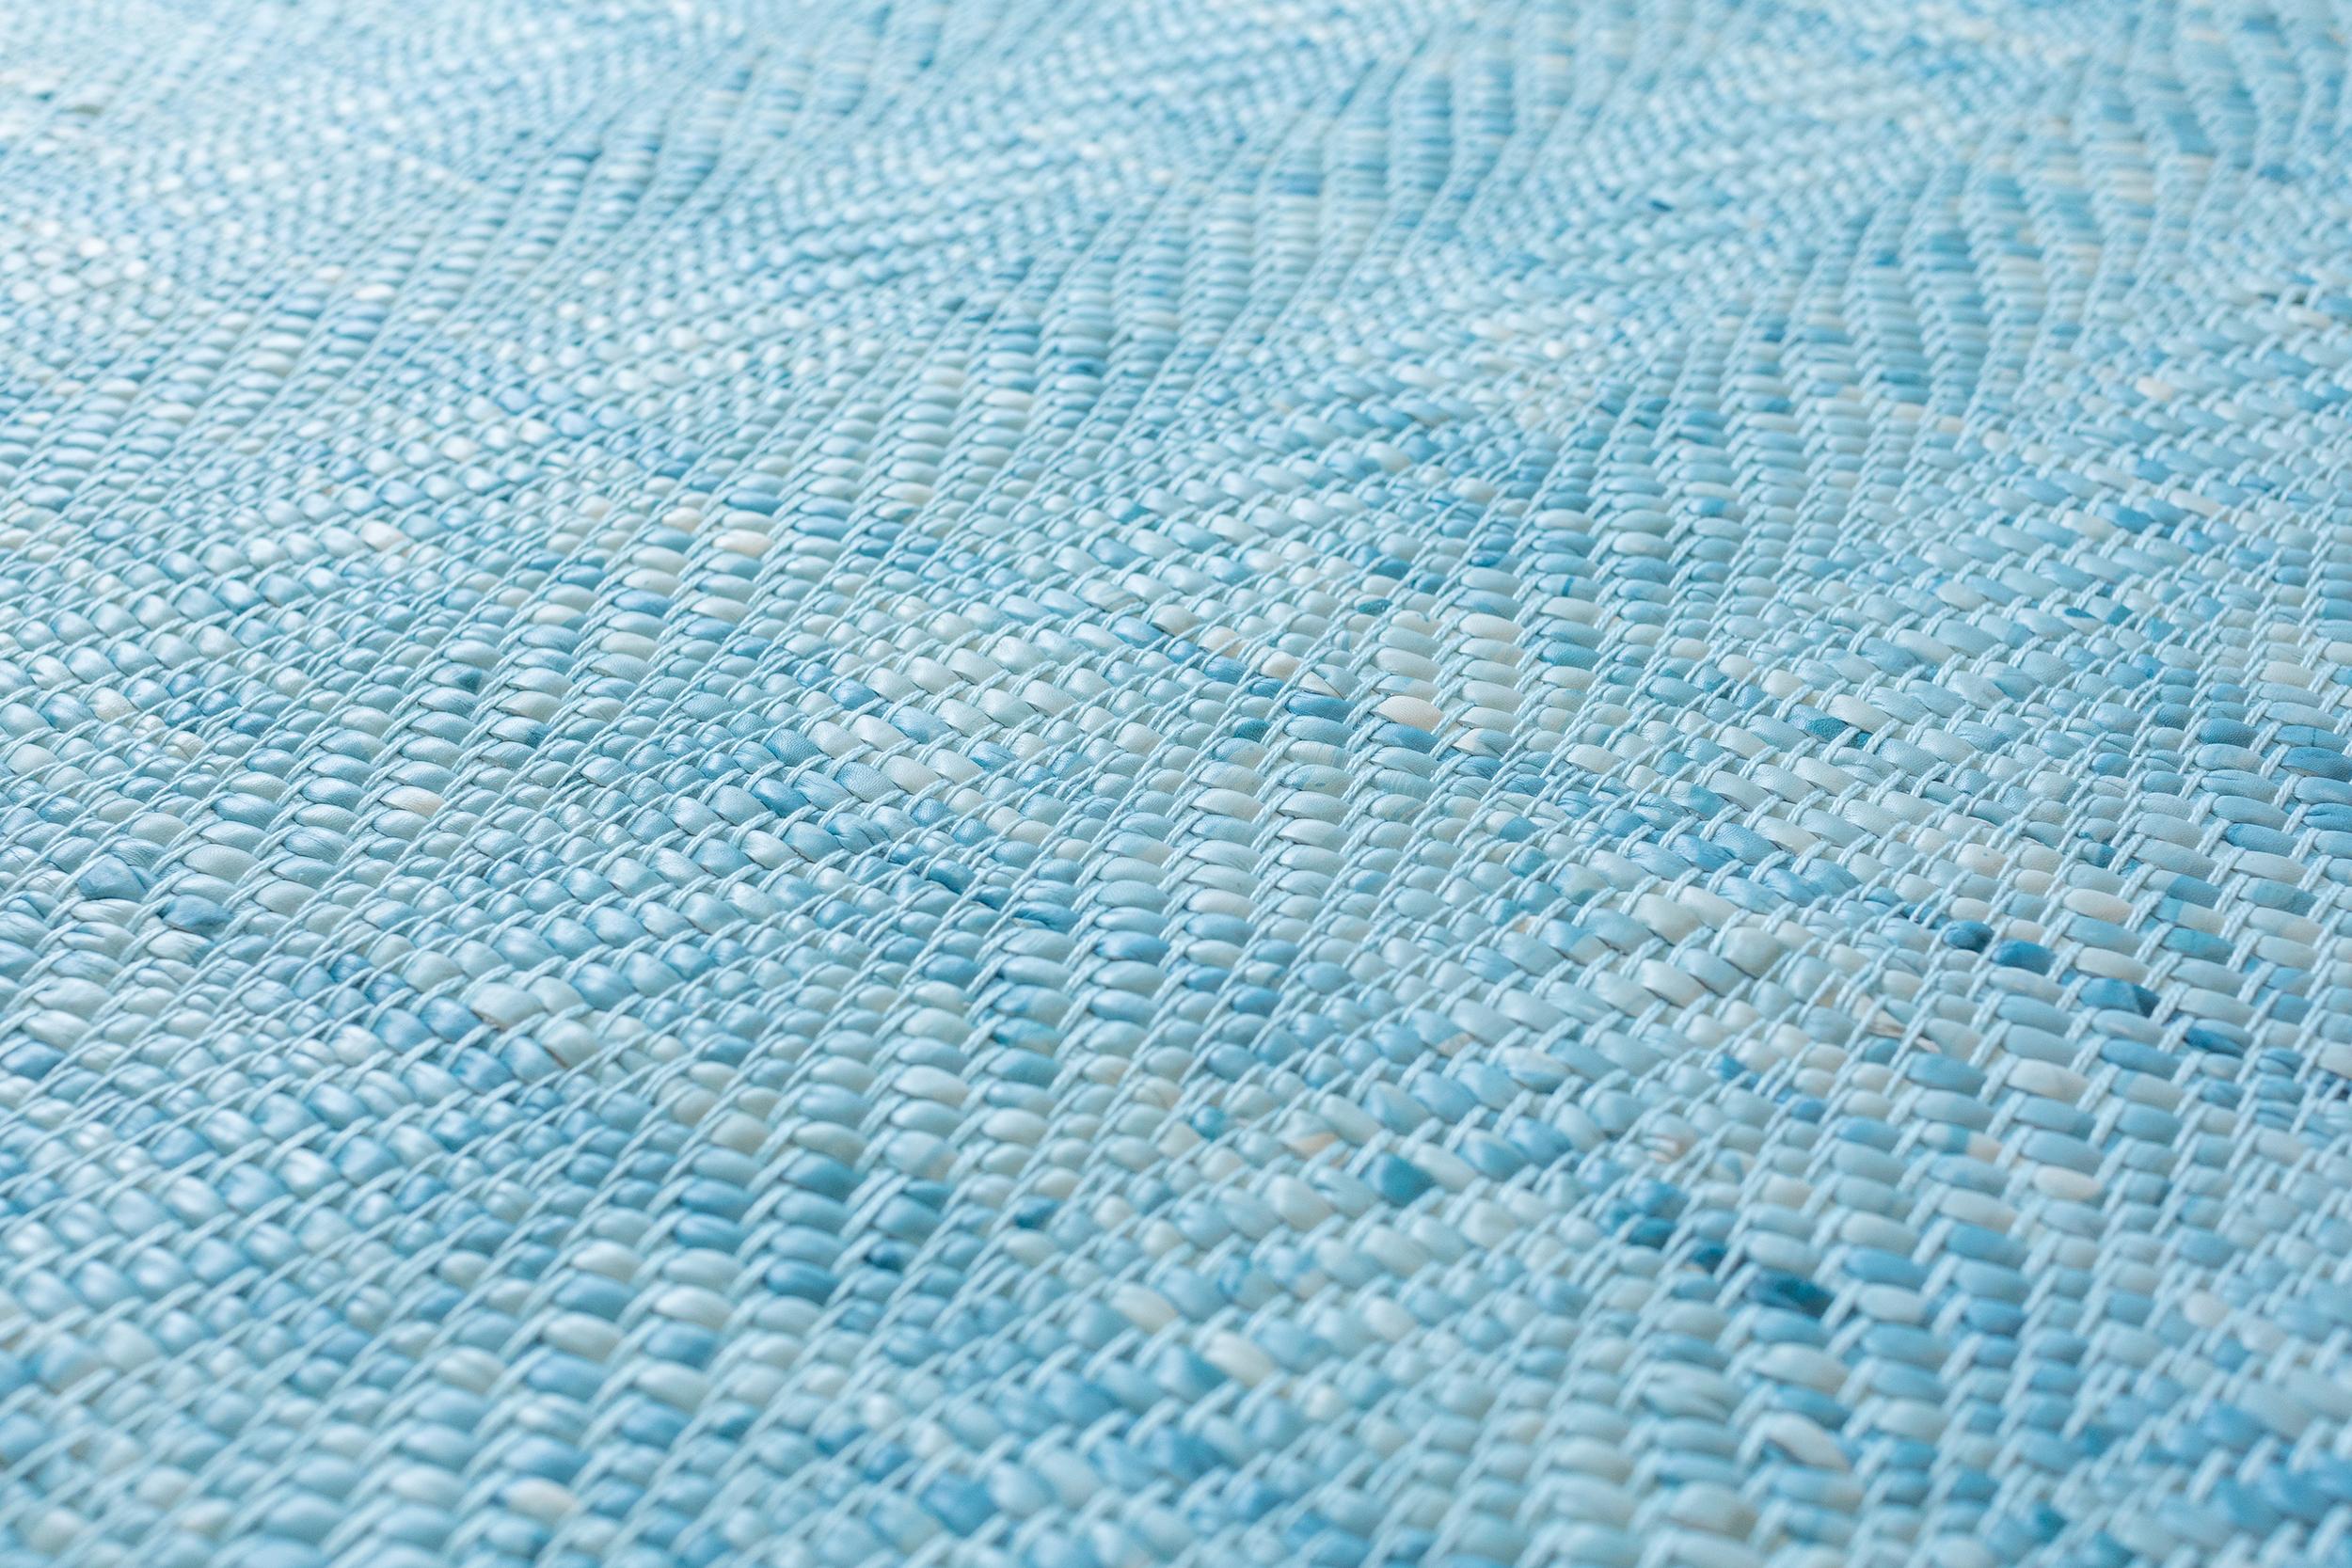 This 8' x 10' wave rug is hand dyed in our Brooklyn studio and woven with artisans in the United States. It is designed to have textural and visual depth with a cushioned feel and refined selvage edge. We use dyes, not paint, to create our work,